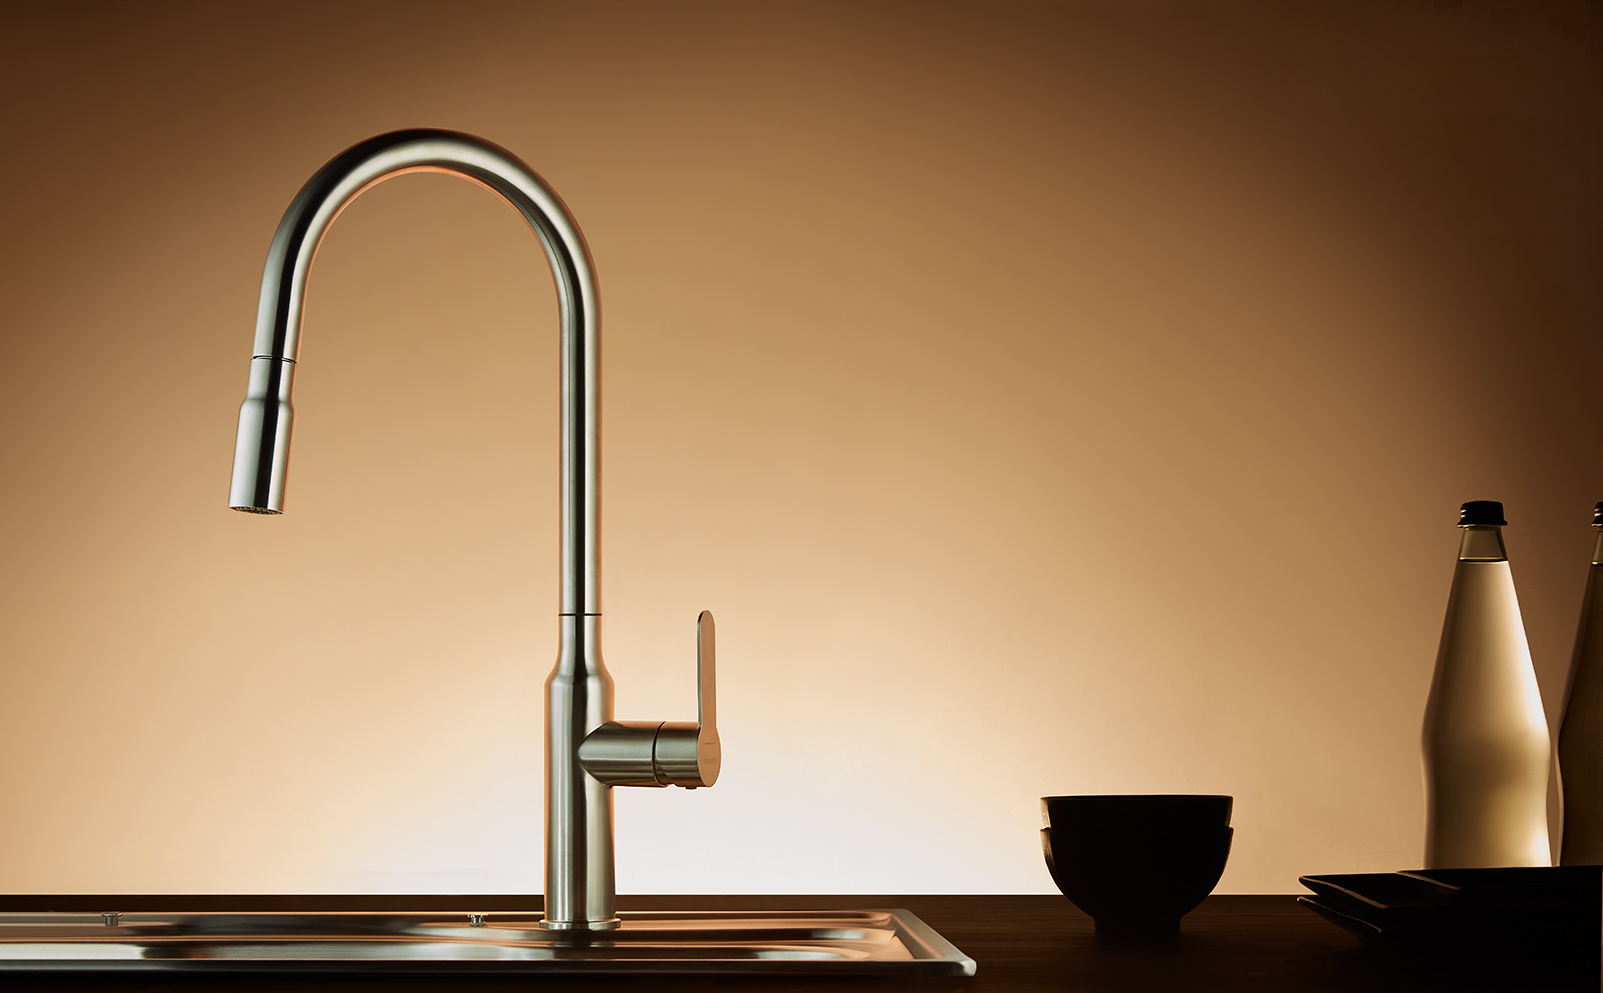 Create a sophisticated kitchen life with the use of Cresheen faucets